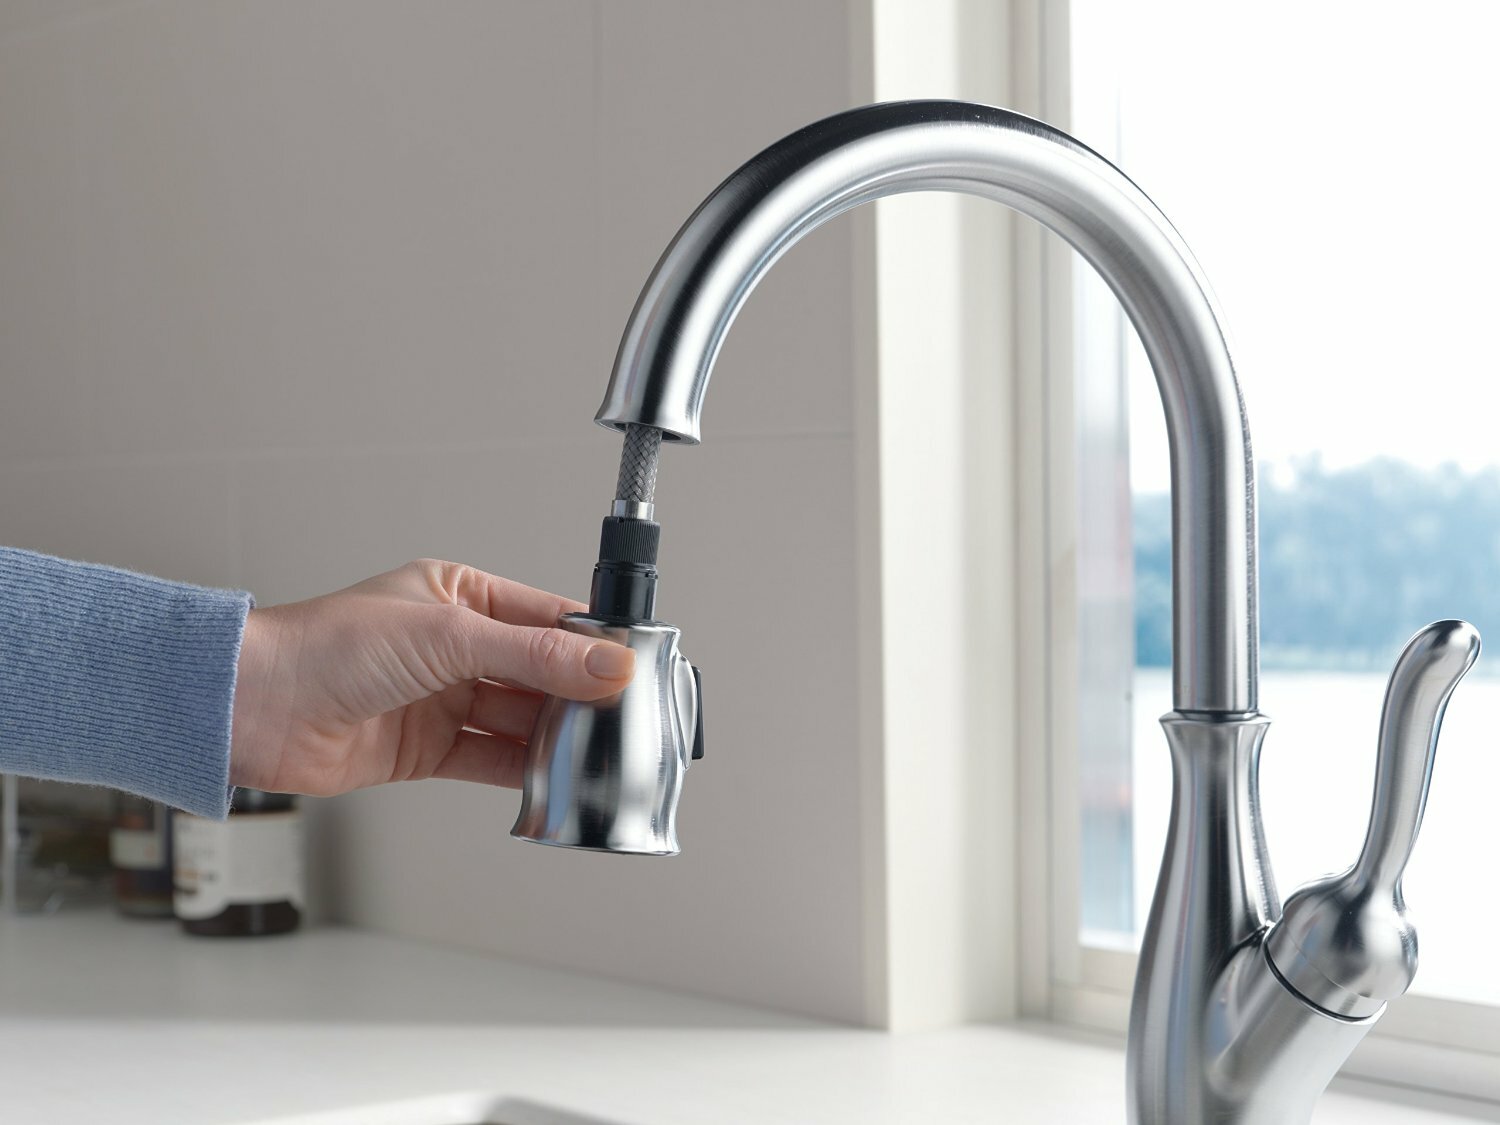 Overview of a Pull-Down Faucet